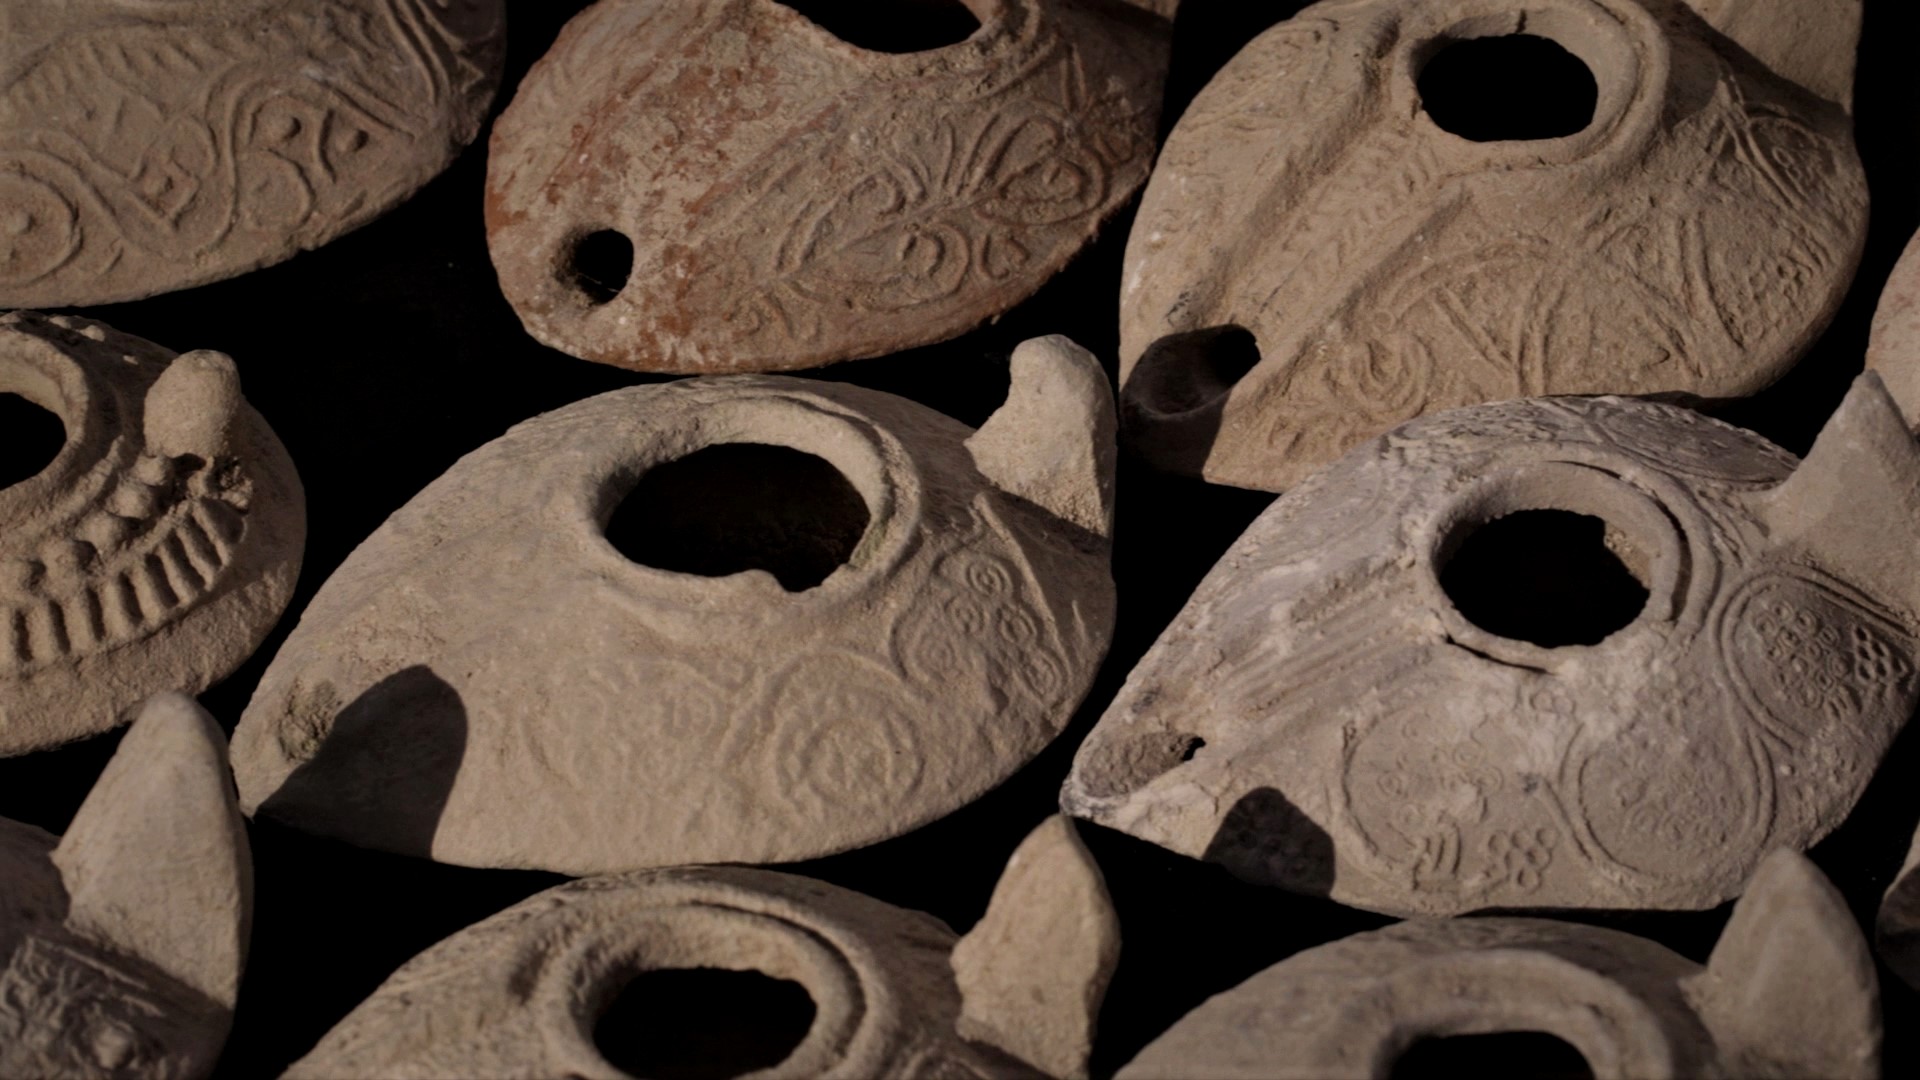 There are nine clay oil lamps. Each is shaped like a teardrop with a hole on top and decorated with circular patterns.